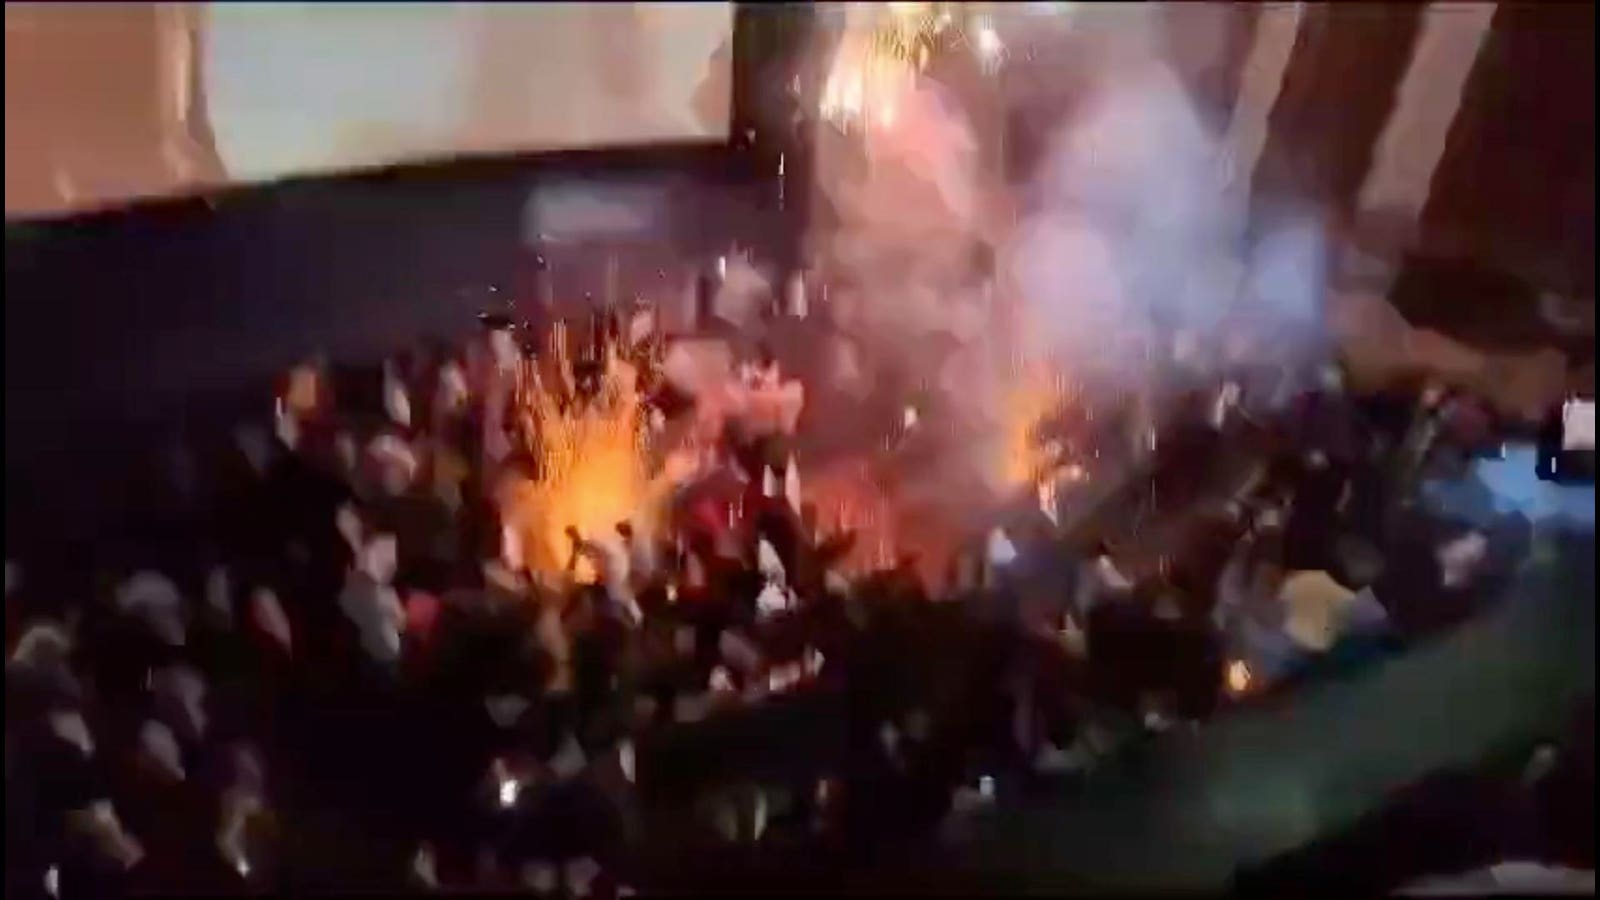 Viral Video Falsely Claims Fireworks Exploded In Screening Of ‘The Holdovers’